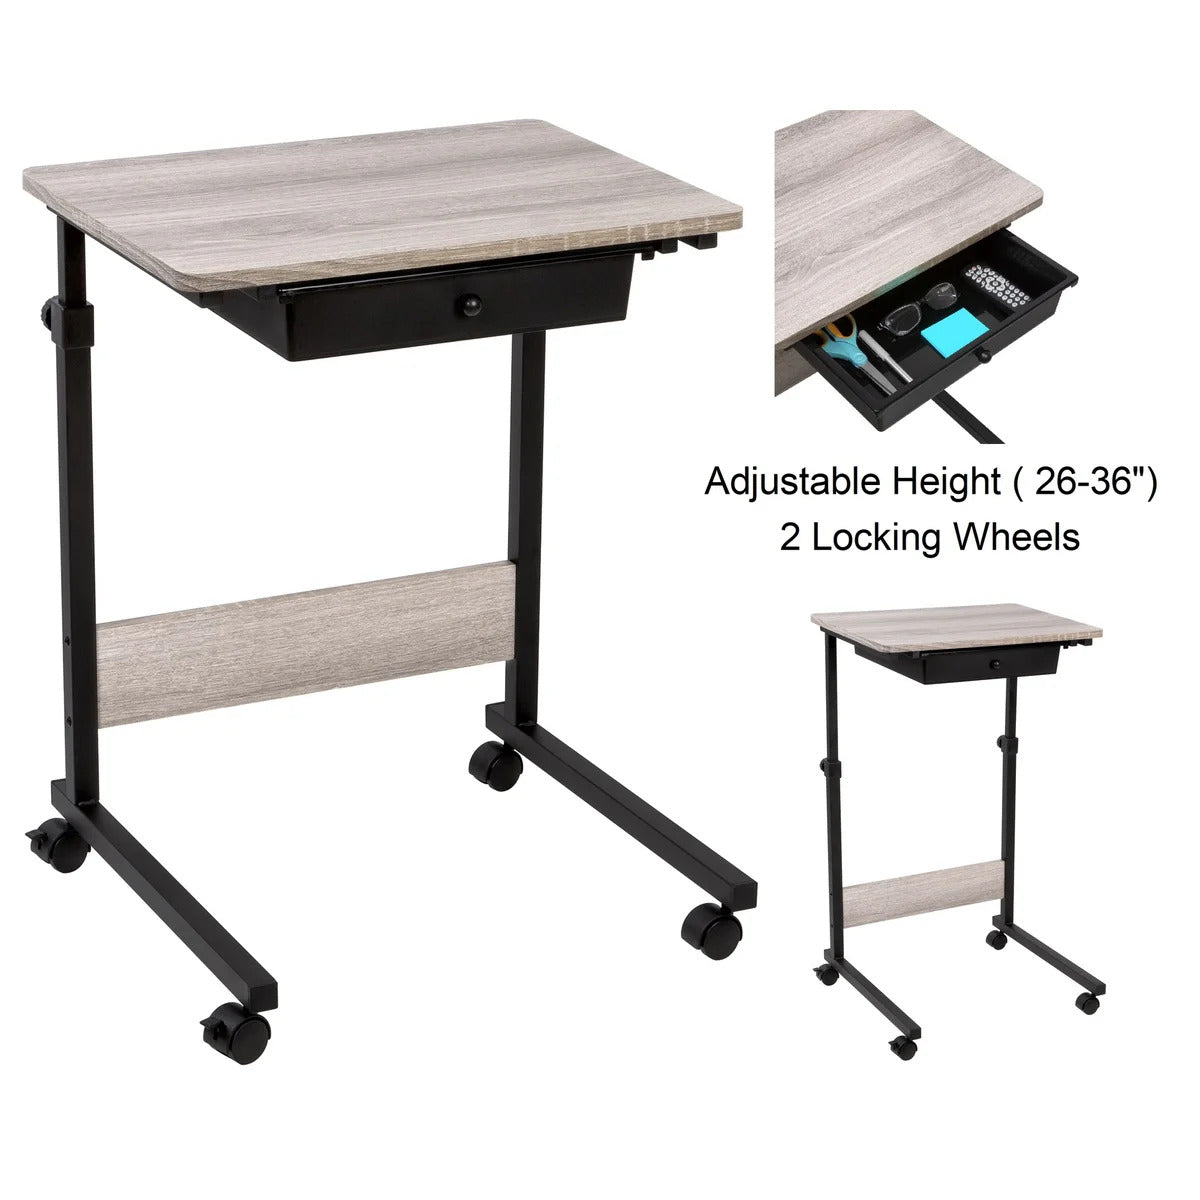 Adjustable C-Shaped Side Table with Wheels and Drawer (Home Craft Use)